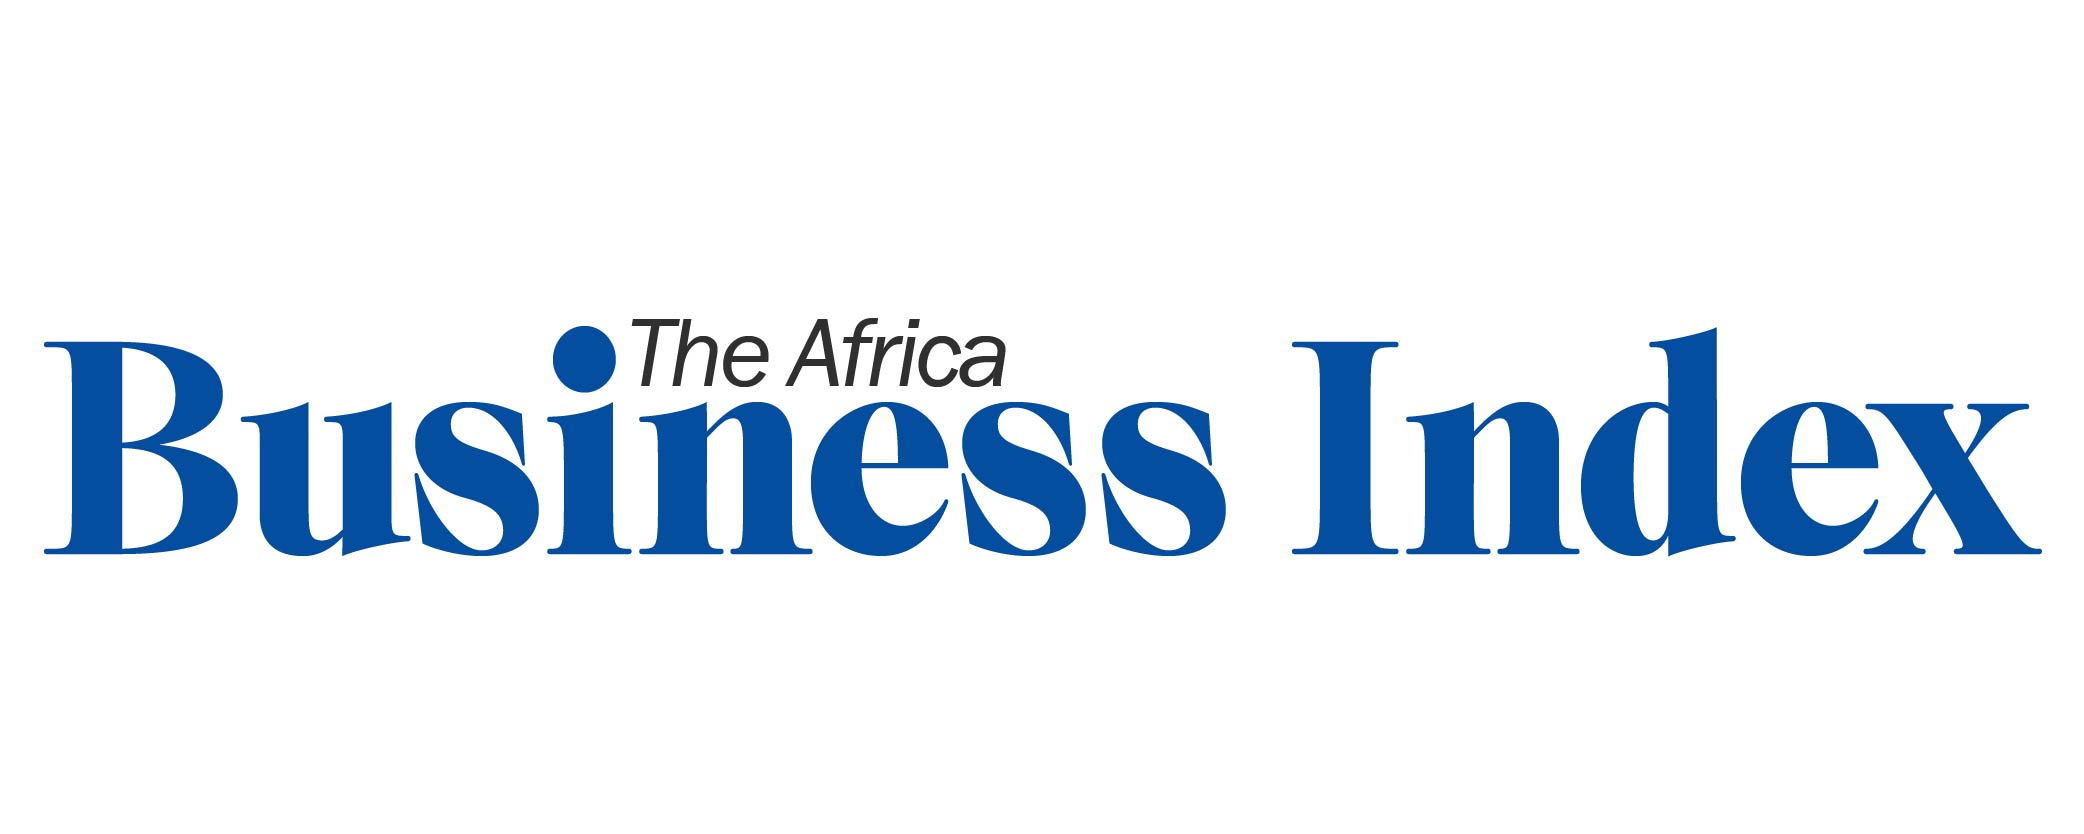 The Africa Business Index